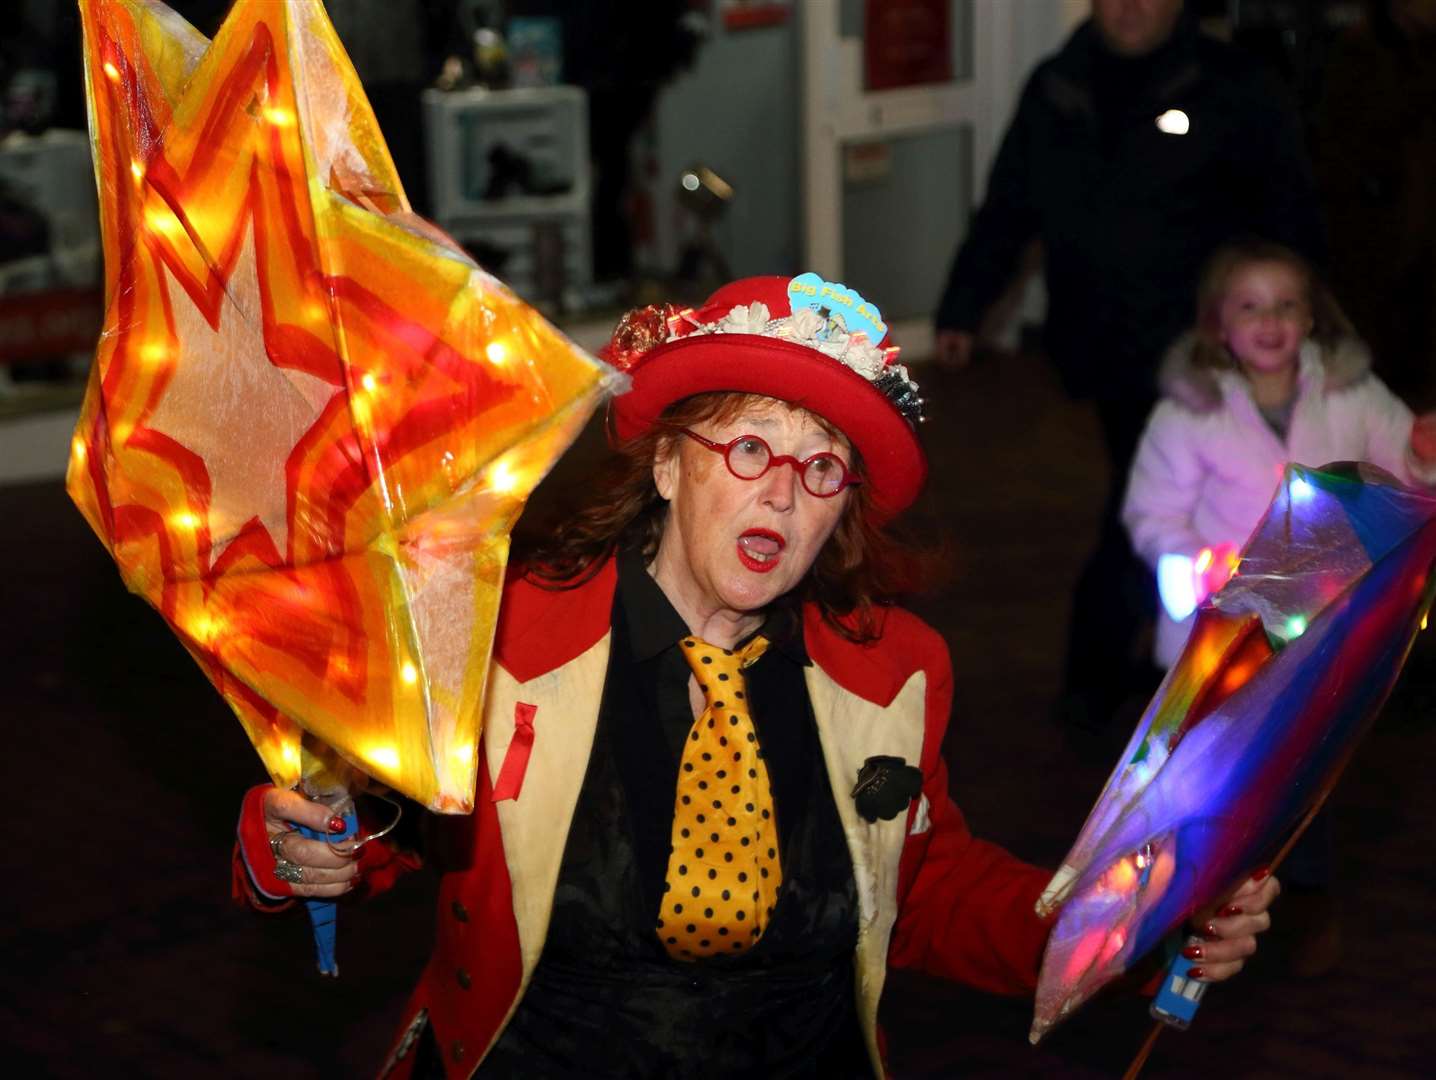 Chris Reed from Big Fish Arts with her lantern in the town's previous Christmas lights parade. Picture: Cohesion Plus